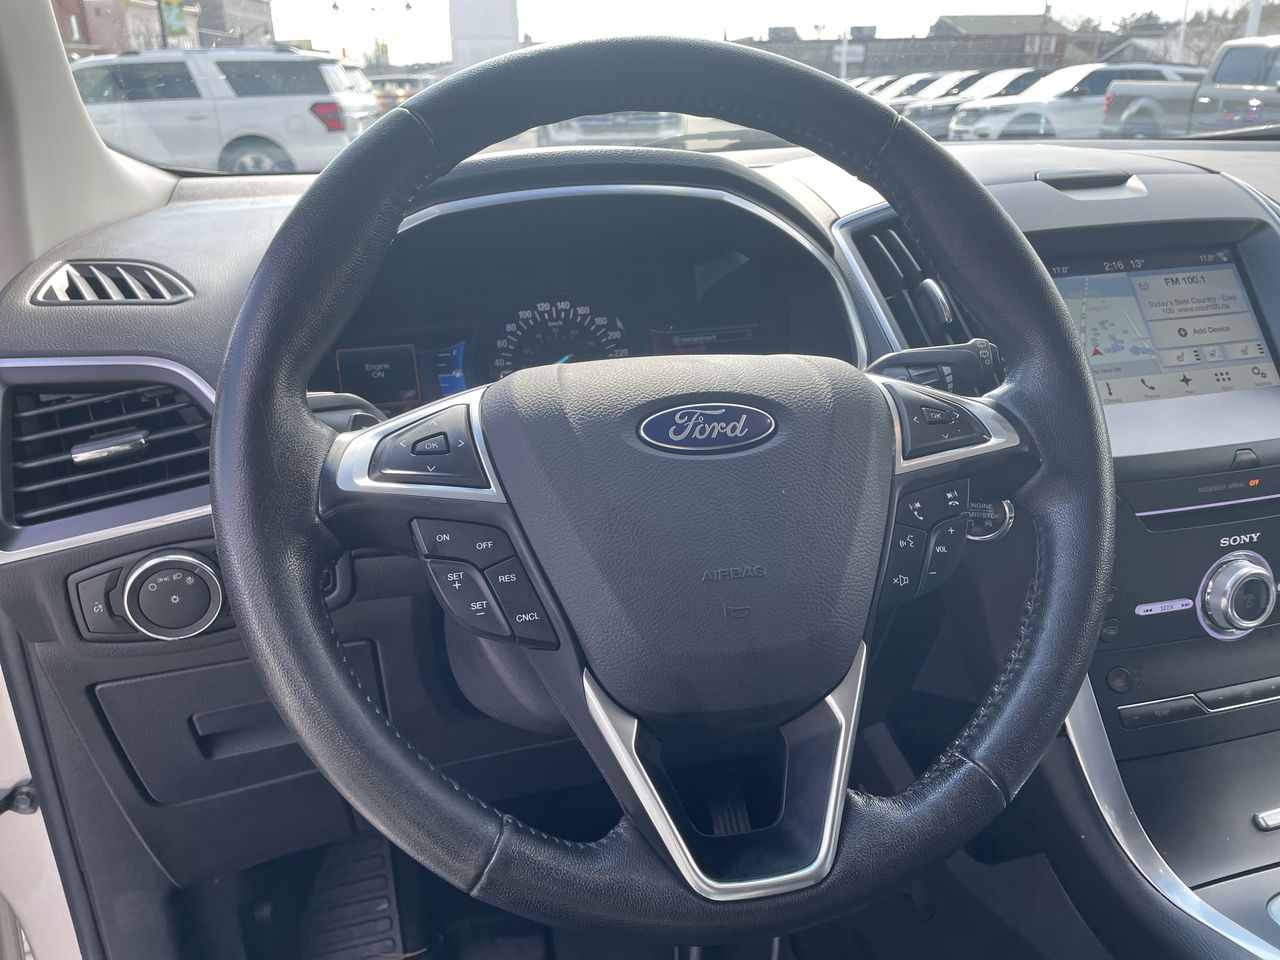 2017 Ford Edge - 21473A Full Image 14